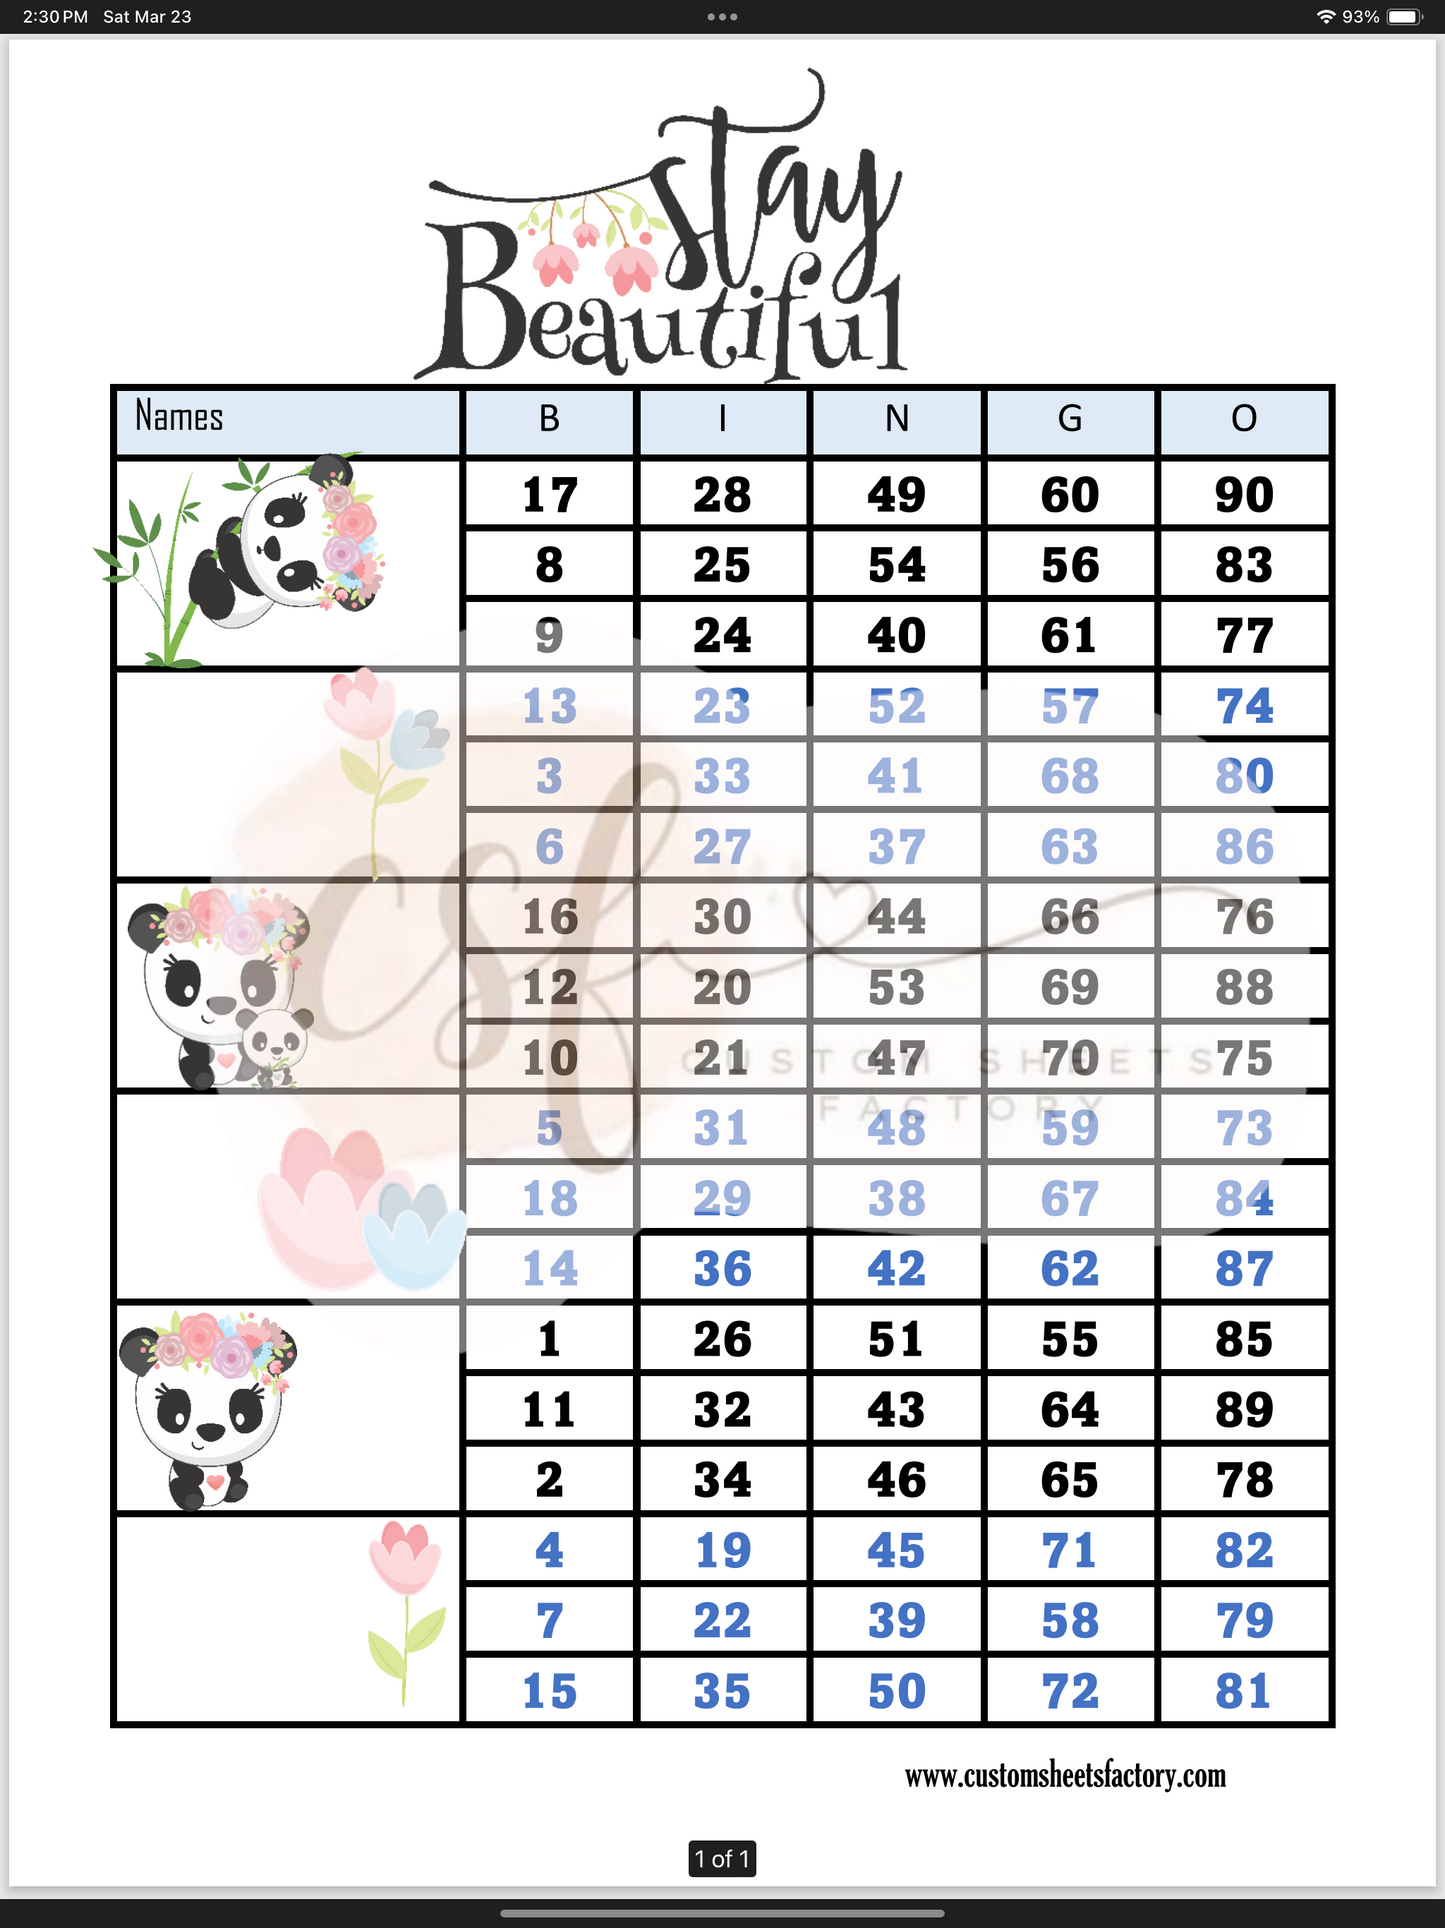 Stay Beautiful - Various Designs